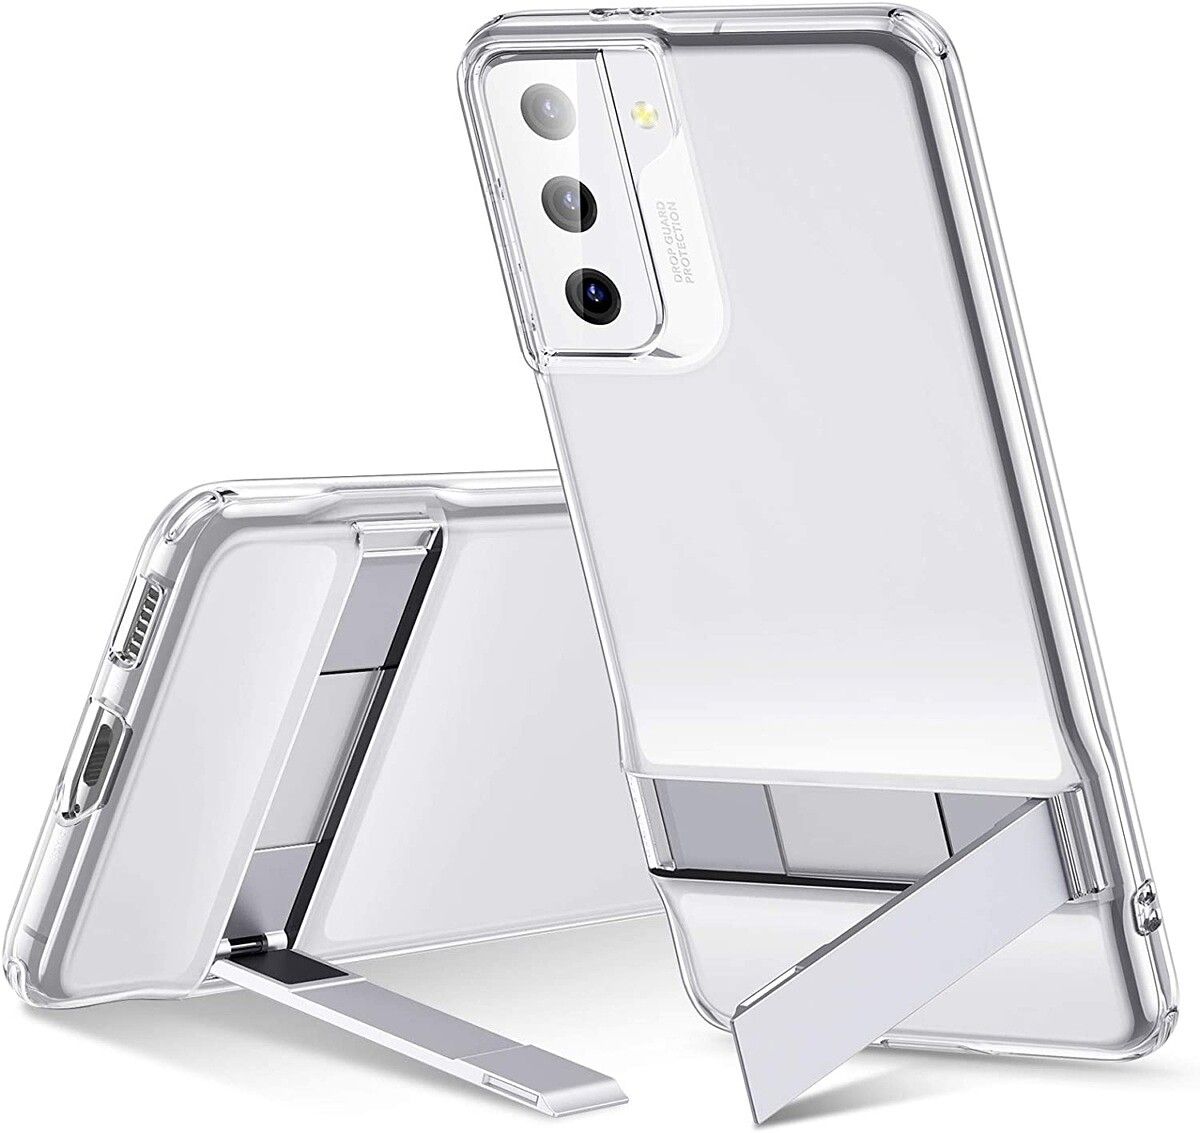 This case from ESR adds a kickstand to the classic clear, clear shell design (also available as a clear black option) and can also be quite cheap compared to other official options that also have a kickstand.